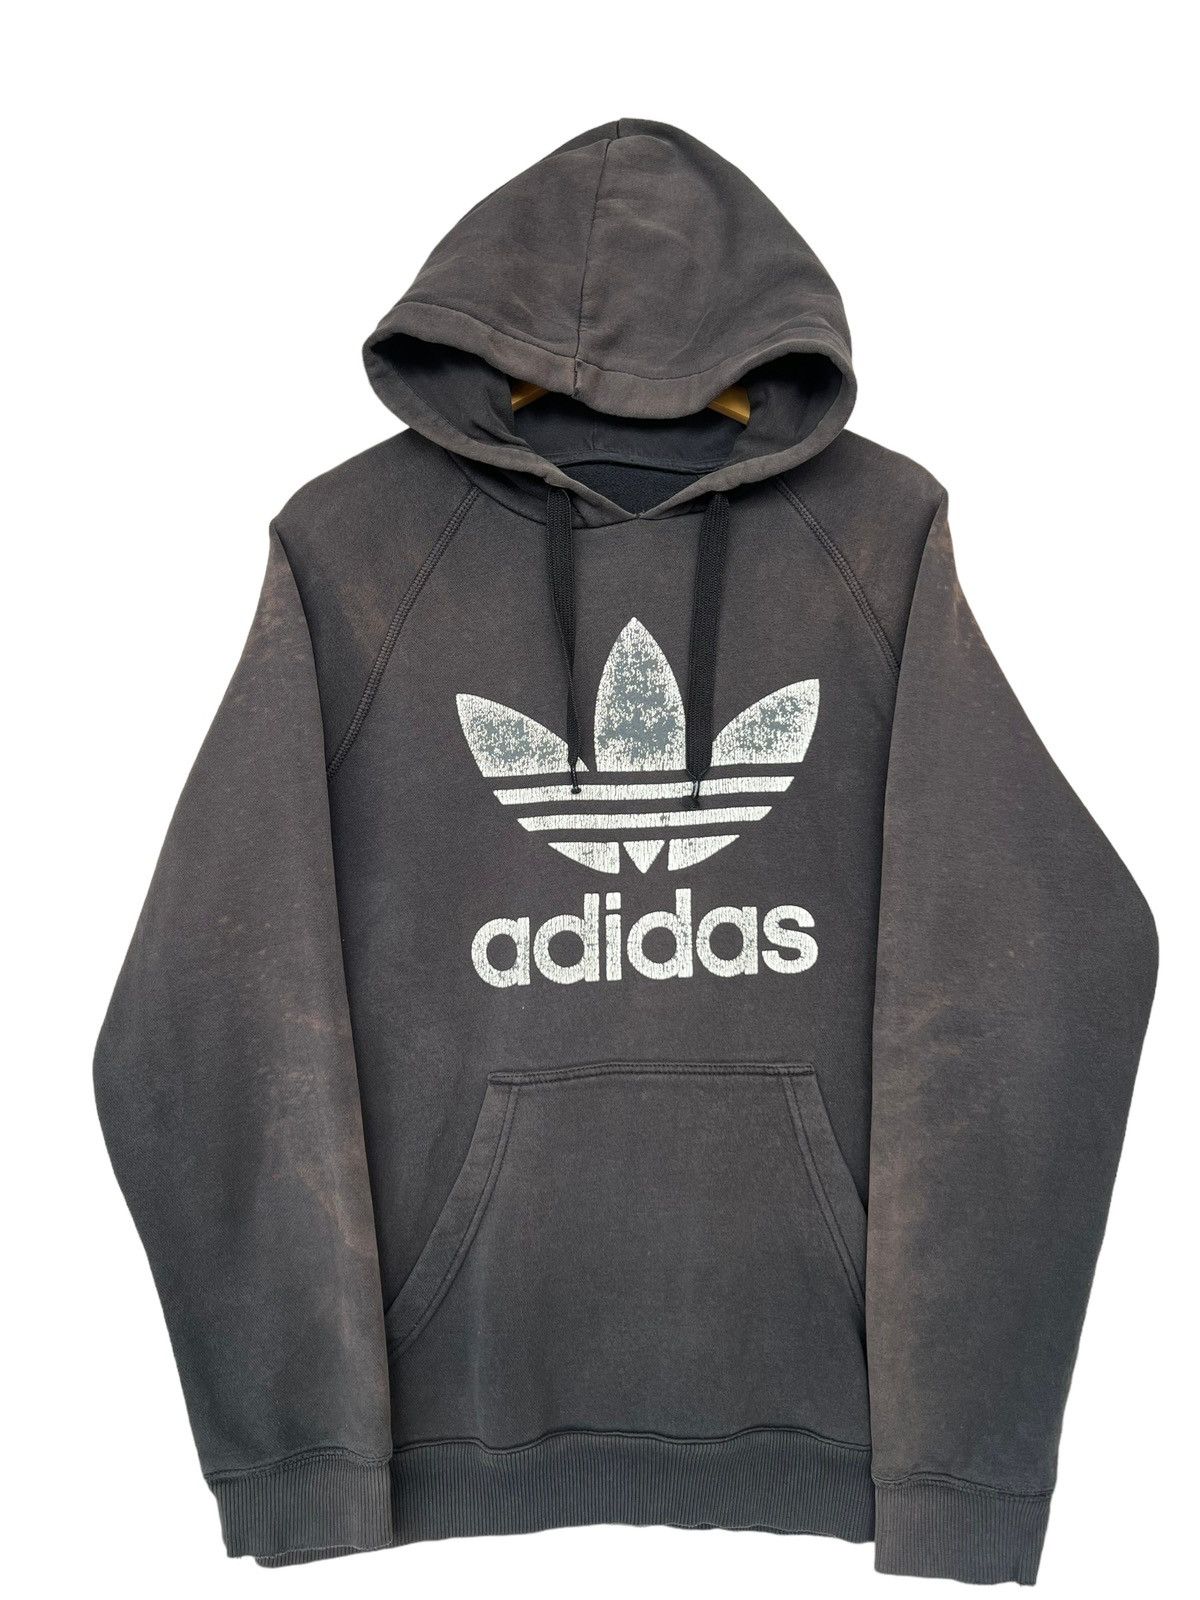 Adidas Distressed Ripped Sunfaded Hoodie - 2